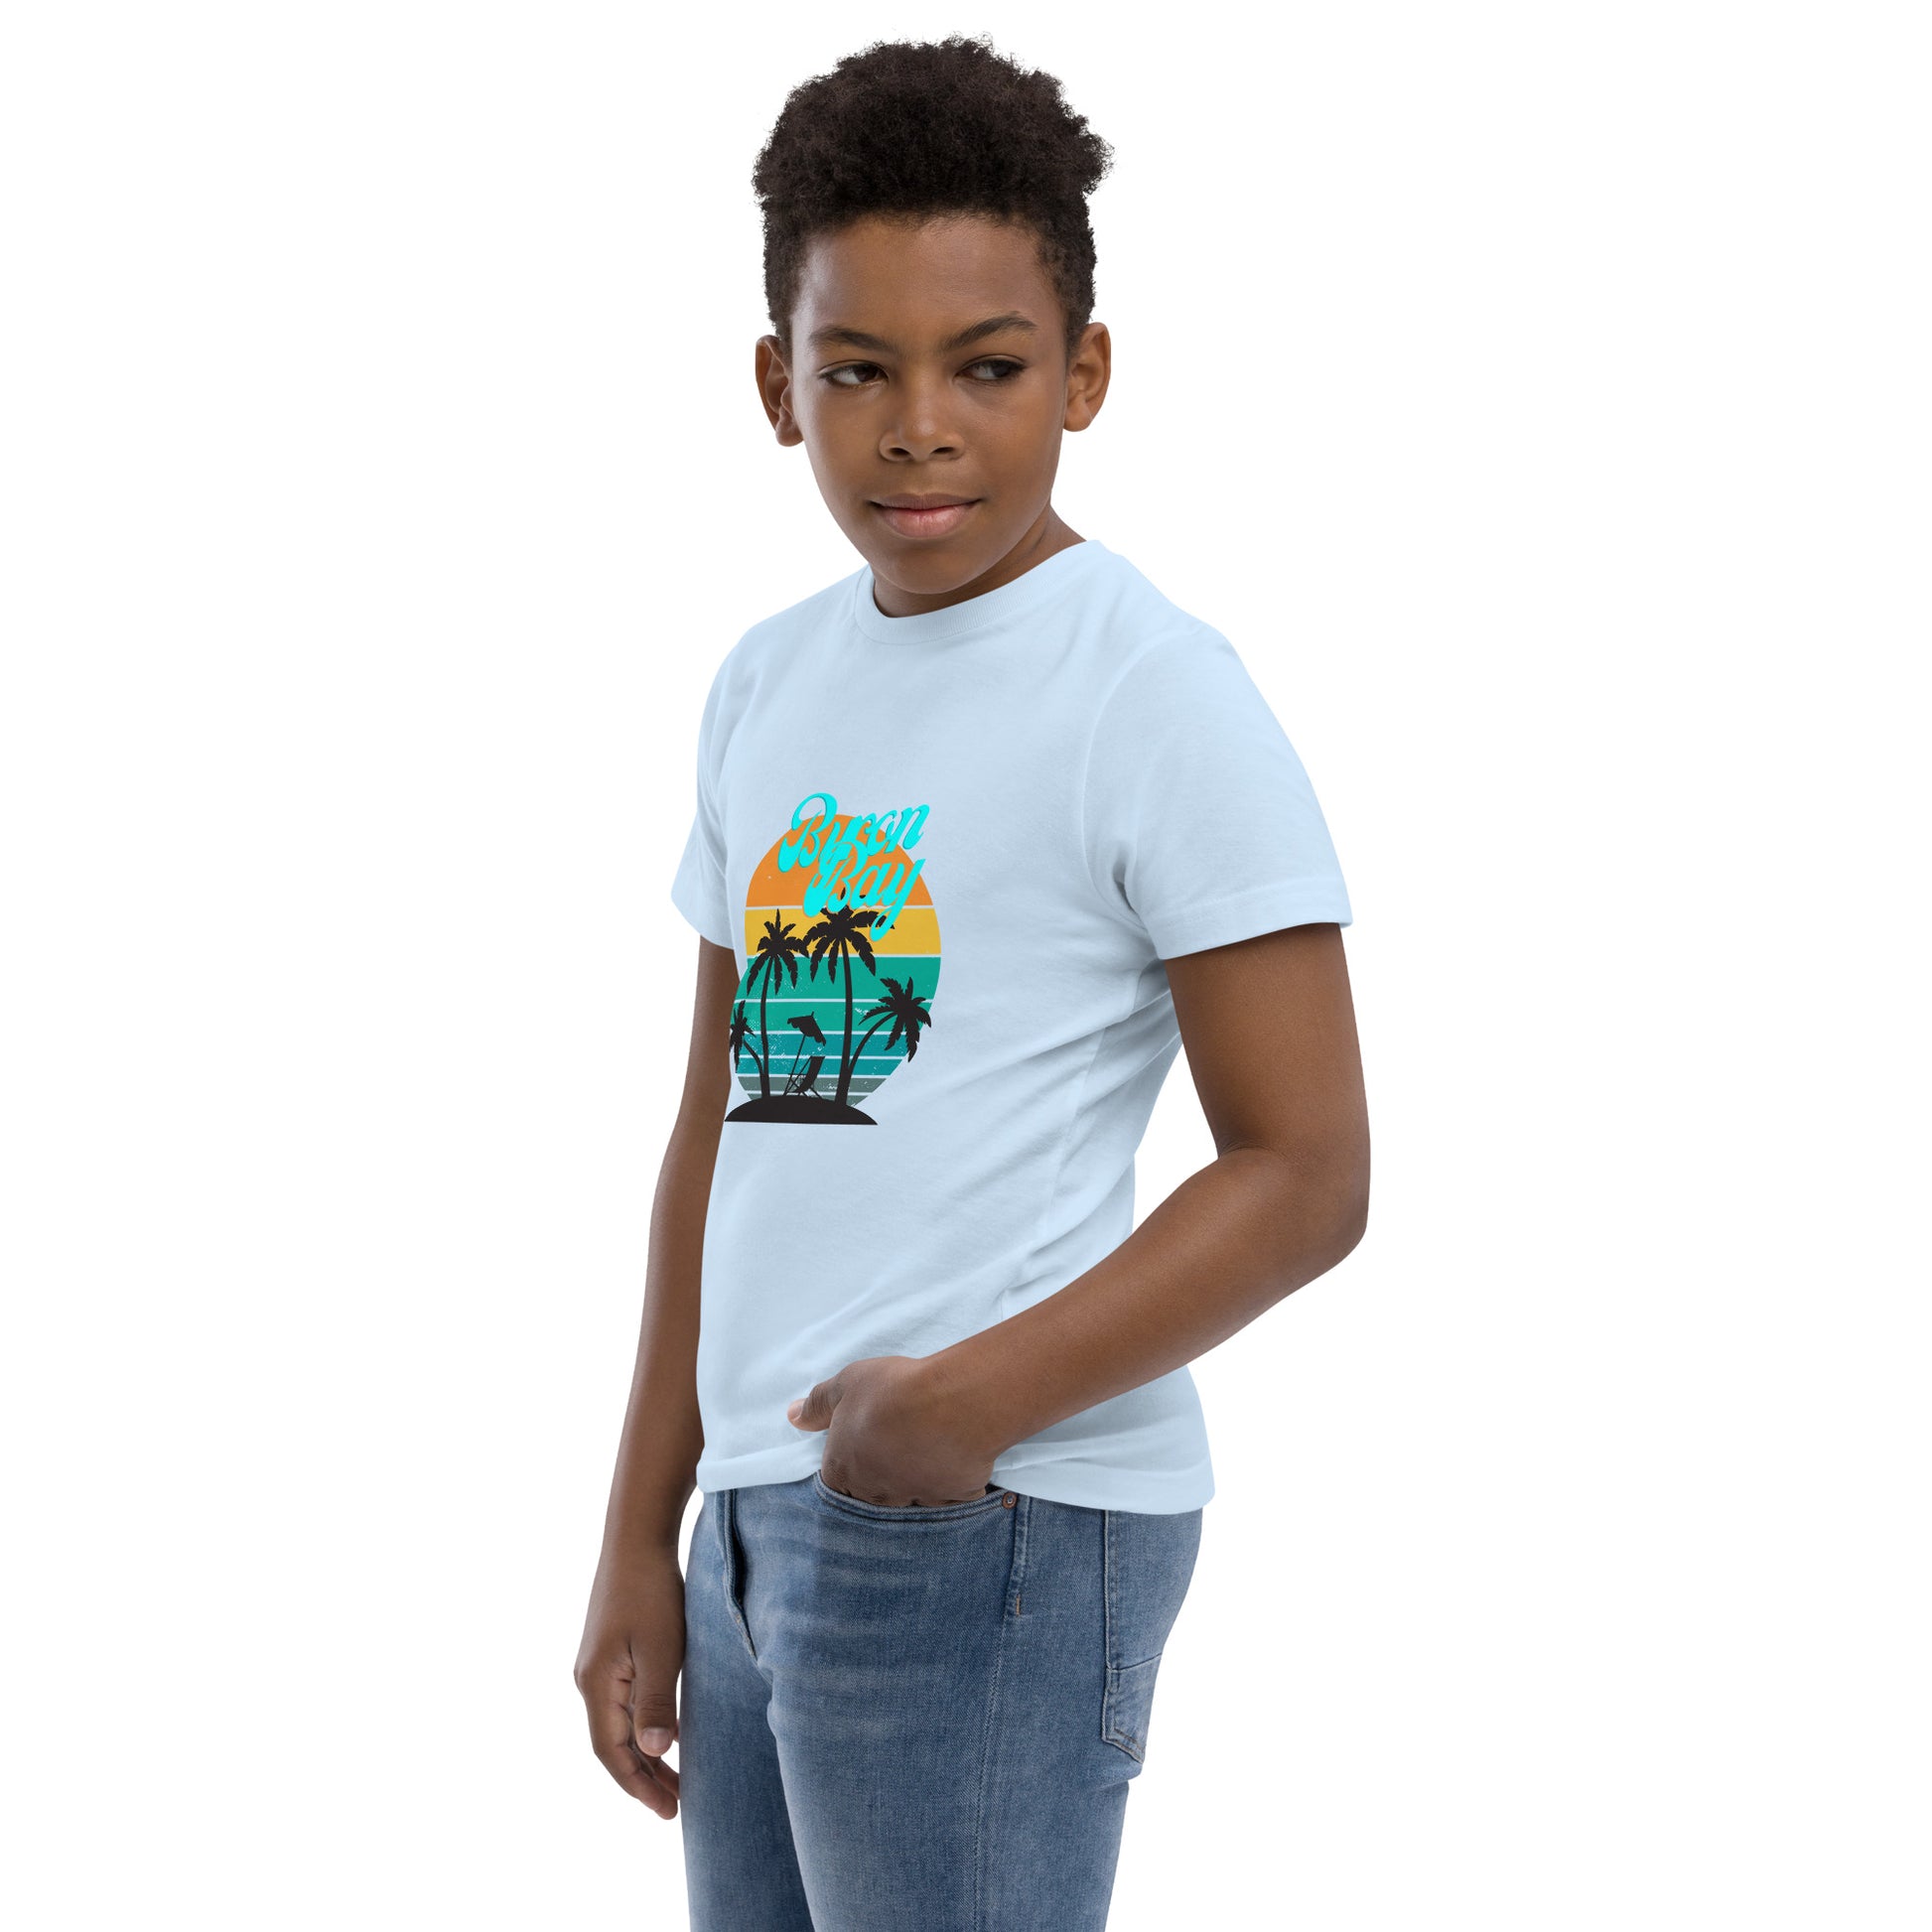  Kids T-Shirt - Light Blue - Side view, being warn on boy standing with a hand in his pocket - Byron Bay design on front - Genuine Byron Bay Merchandise | Produced by Go Sea Kayak Byron Bay 